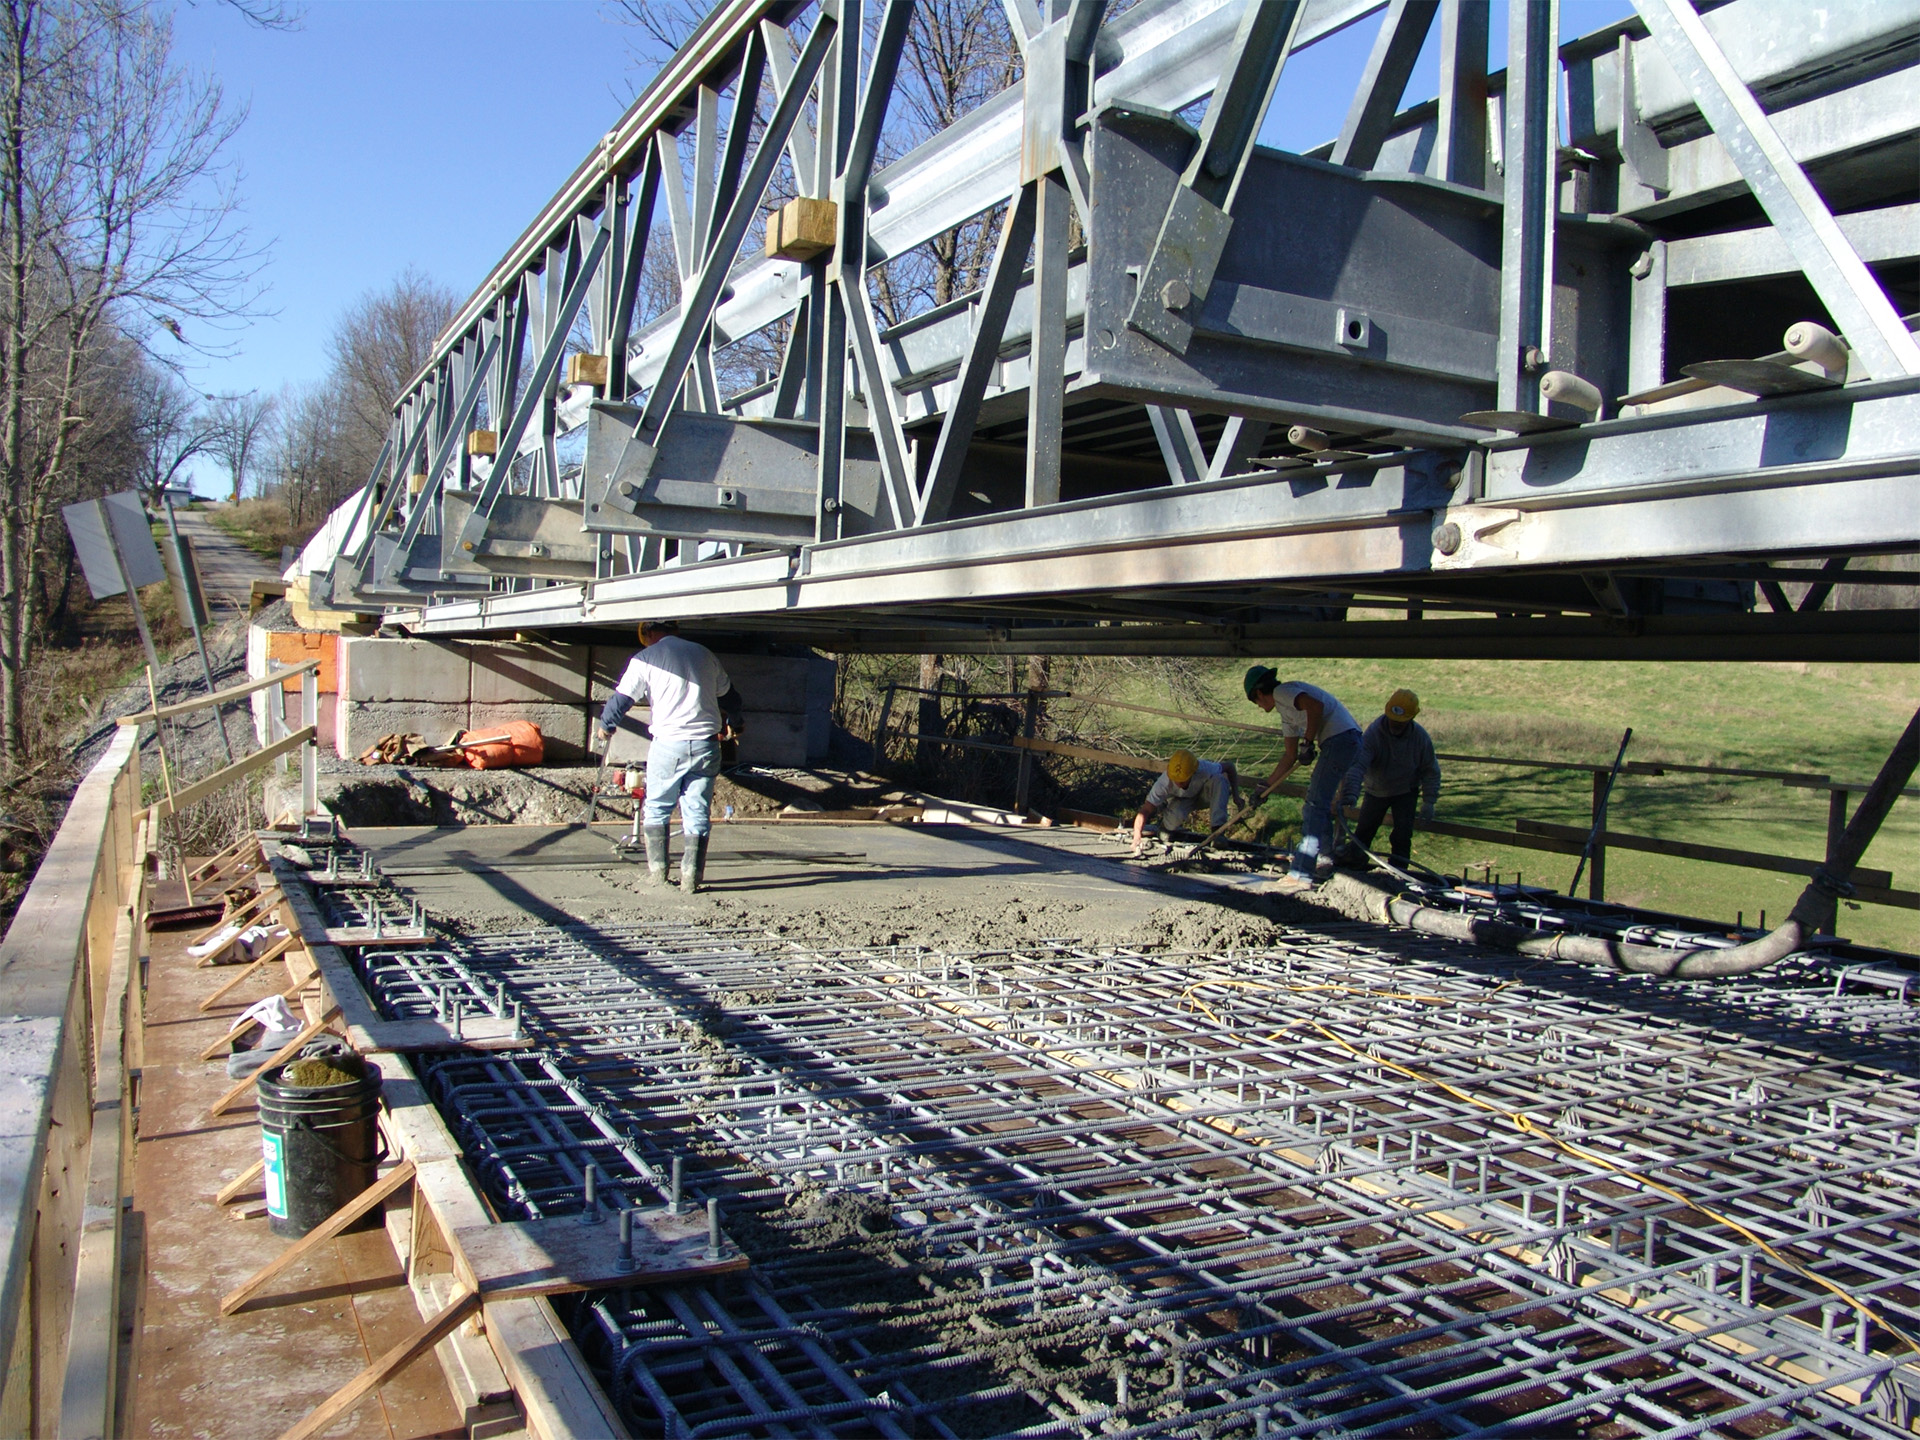 The image shows a construction site at Mississippi Mills where workers are actively engaged in laying concrete and reinforcing bars for a bridge under construction, with a metal truss bridge visible above them